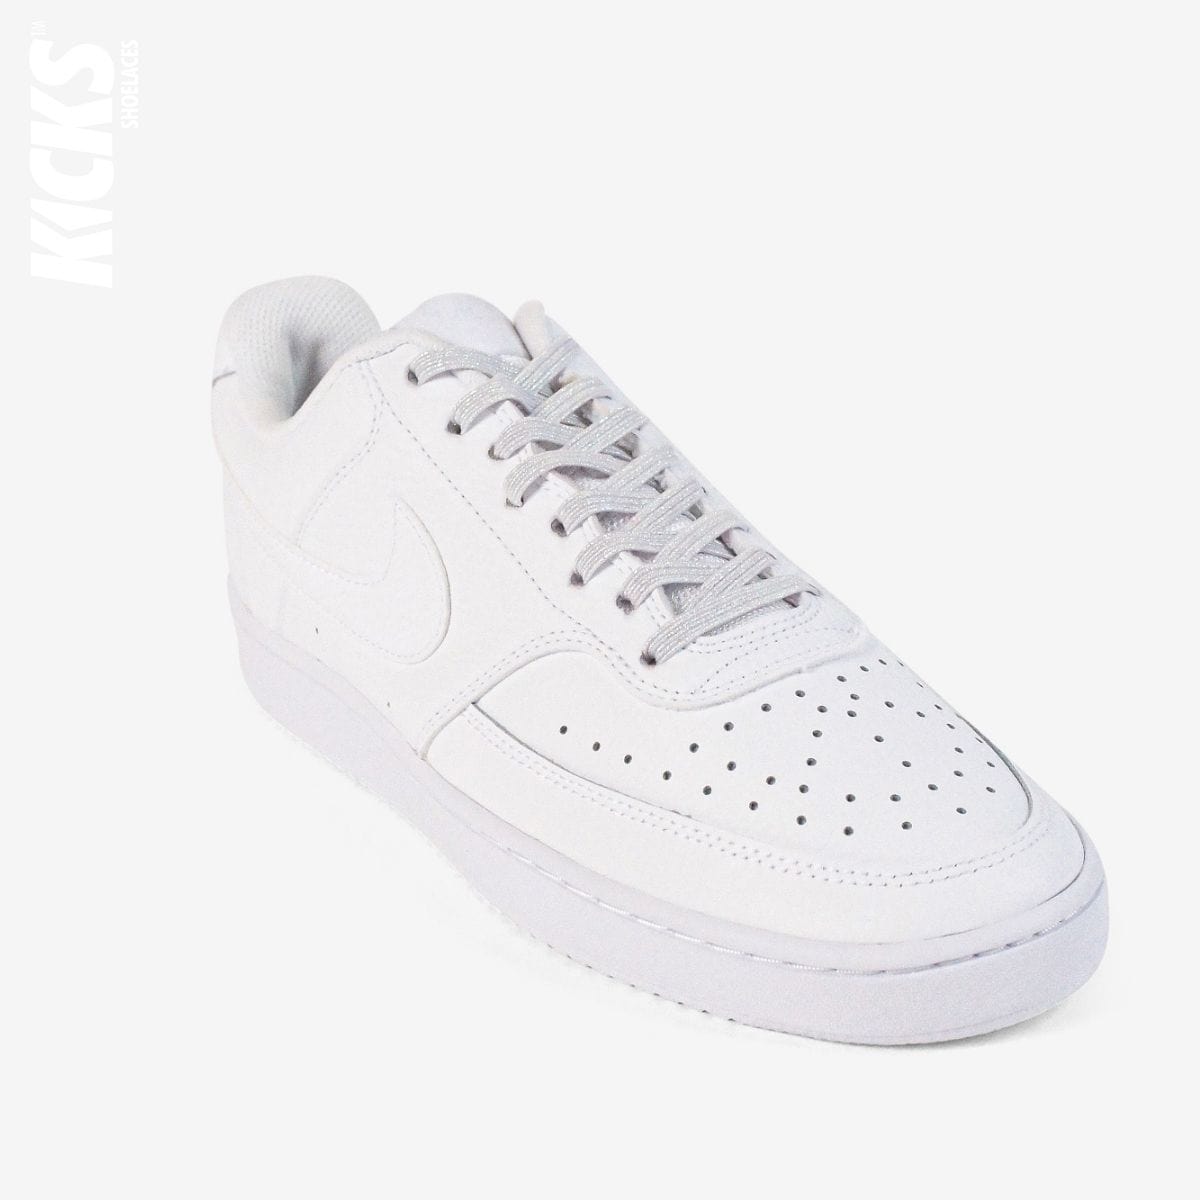 elastic-no-tie-shoelaces-with-white-laces-on-nike-white-sneakers